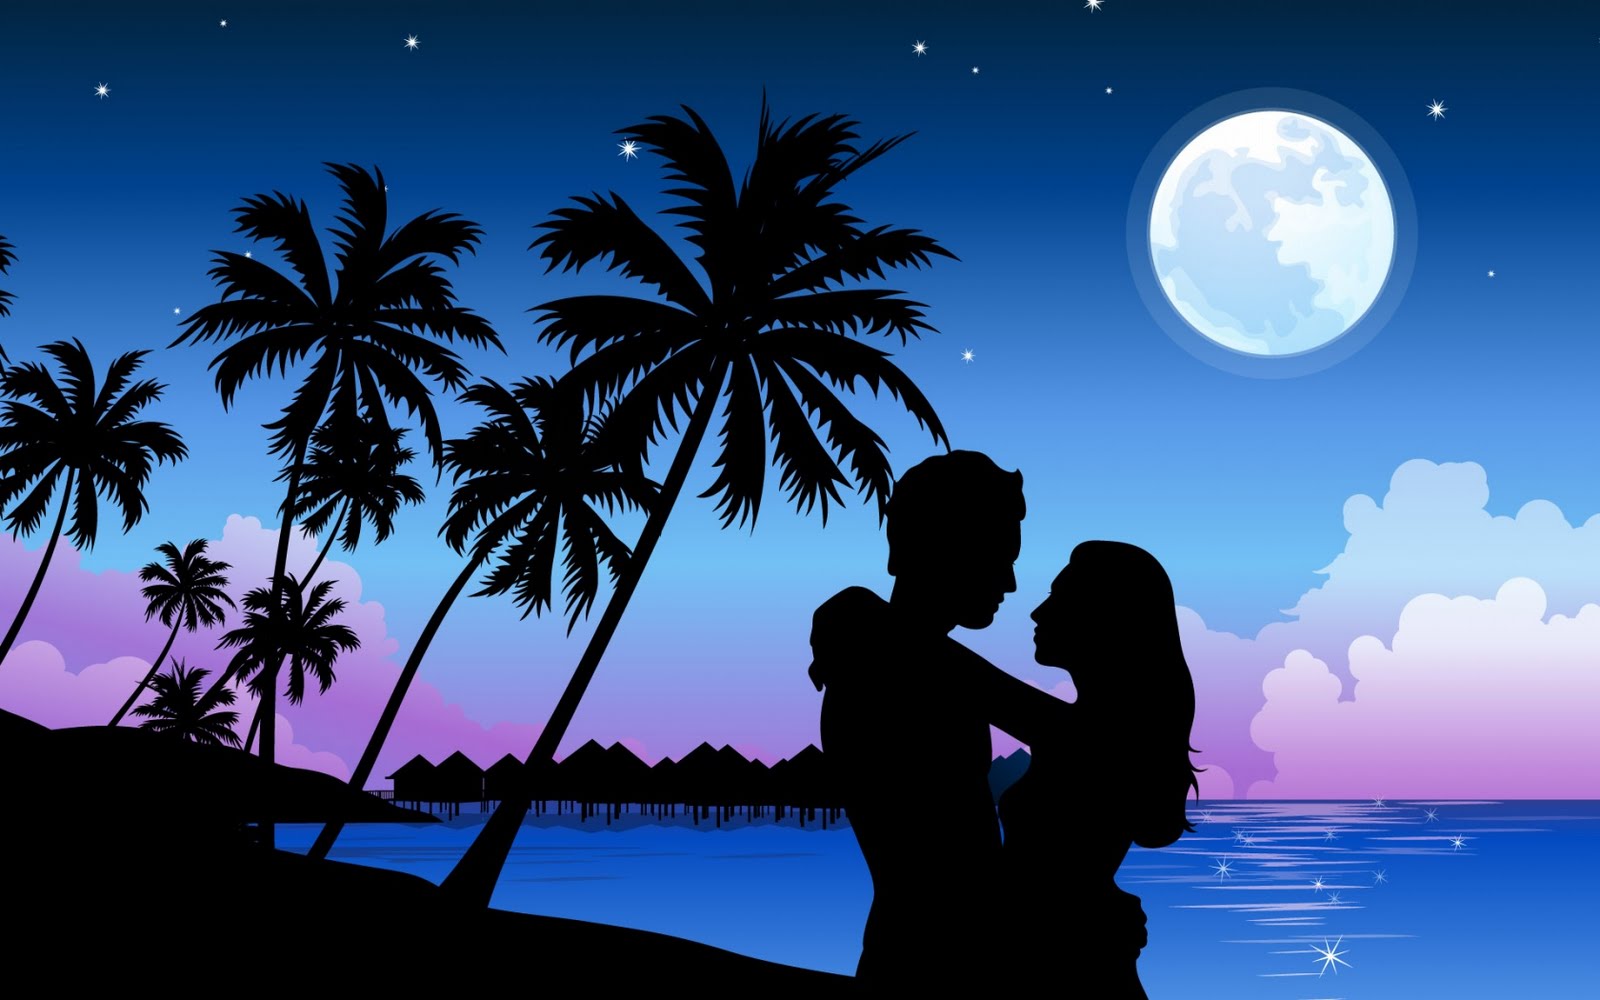 Related Searches Romantic Wallpaper For Desktop